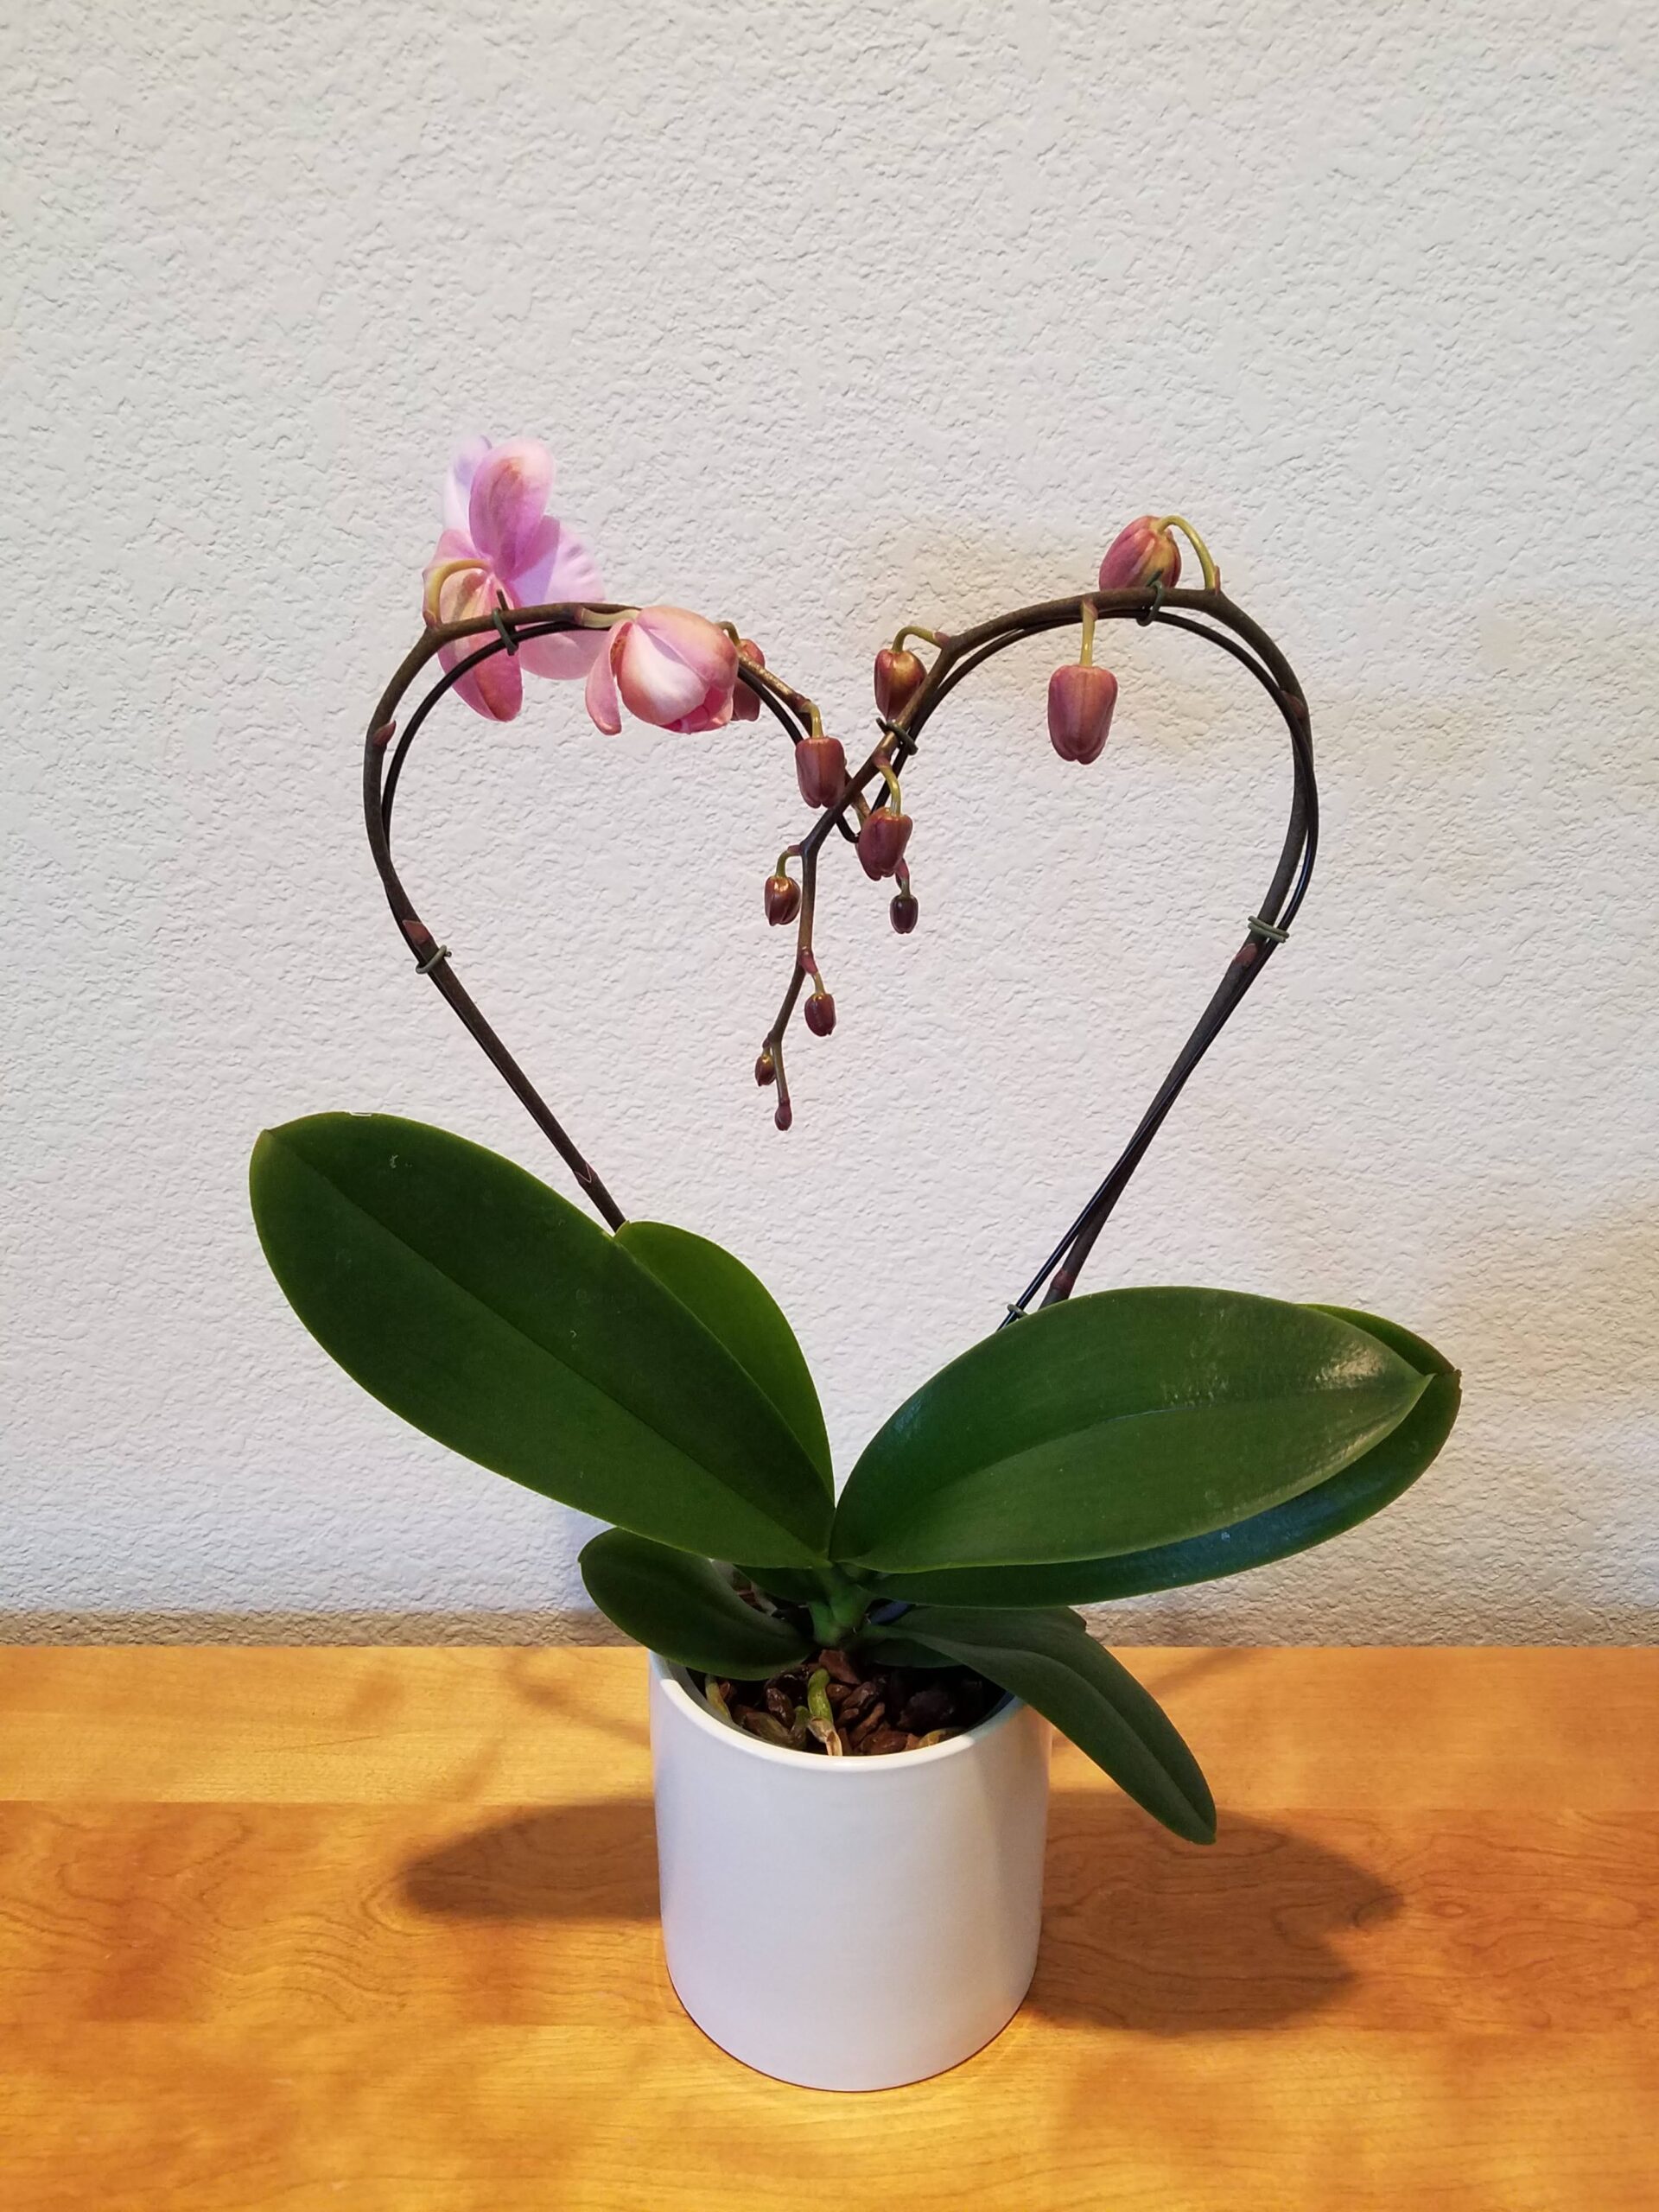 Orchids for Valentine’s Day!